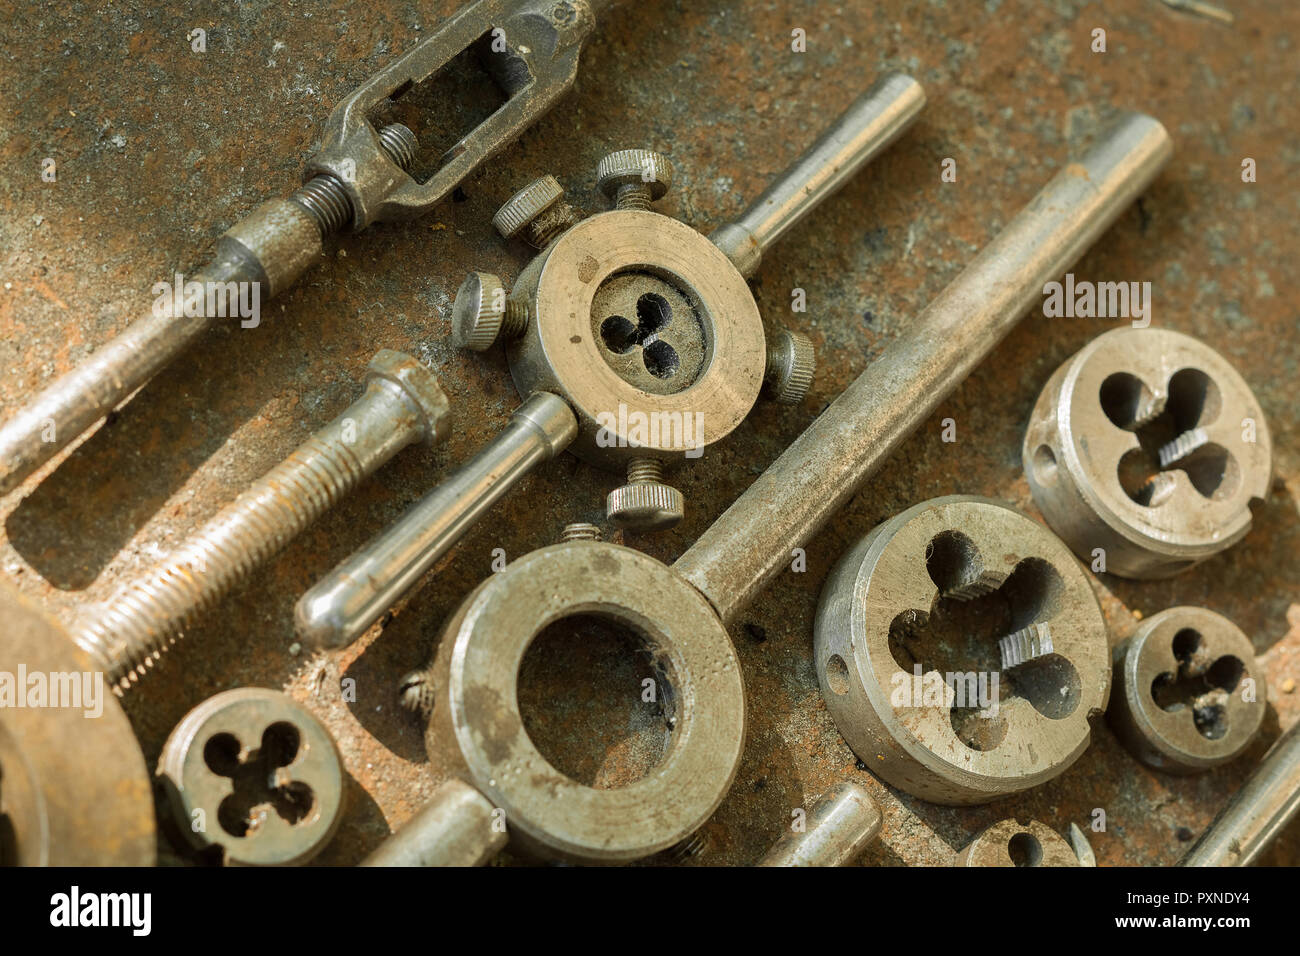 Threading dies on rusty metal surface close-up Stock Photo